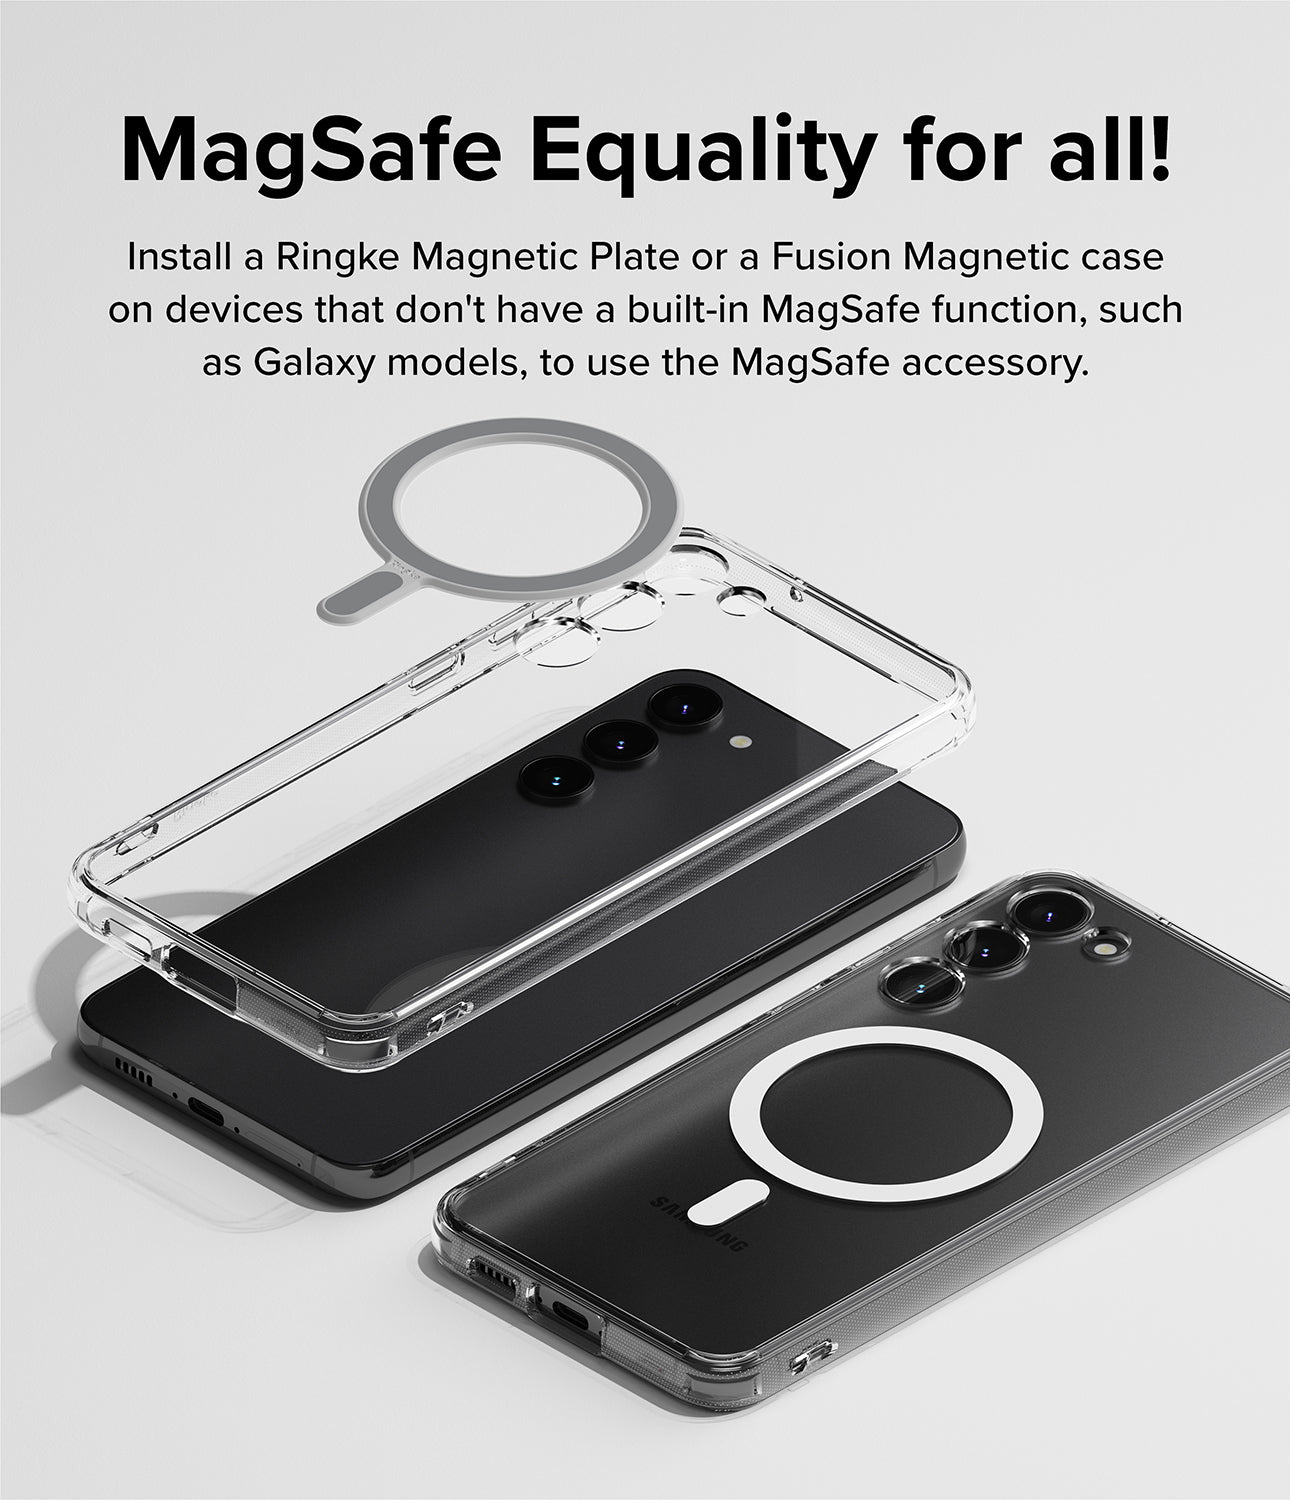 Ringke Stand Grip Magnetic Card Holder Wallet - MagSafe Equality for all! Install Ringke Magnetic Plate or a Fusion Magnetic case on devices that don't have a built-in MagSafe function, such as Galaxy models, to use the MagSafe accessory.